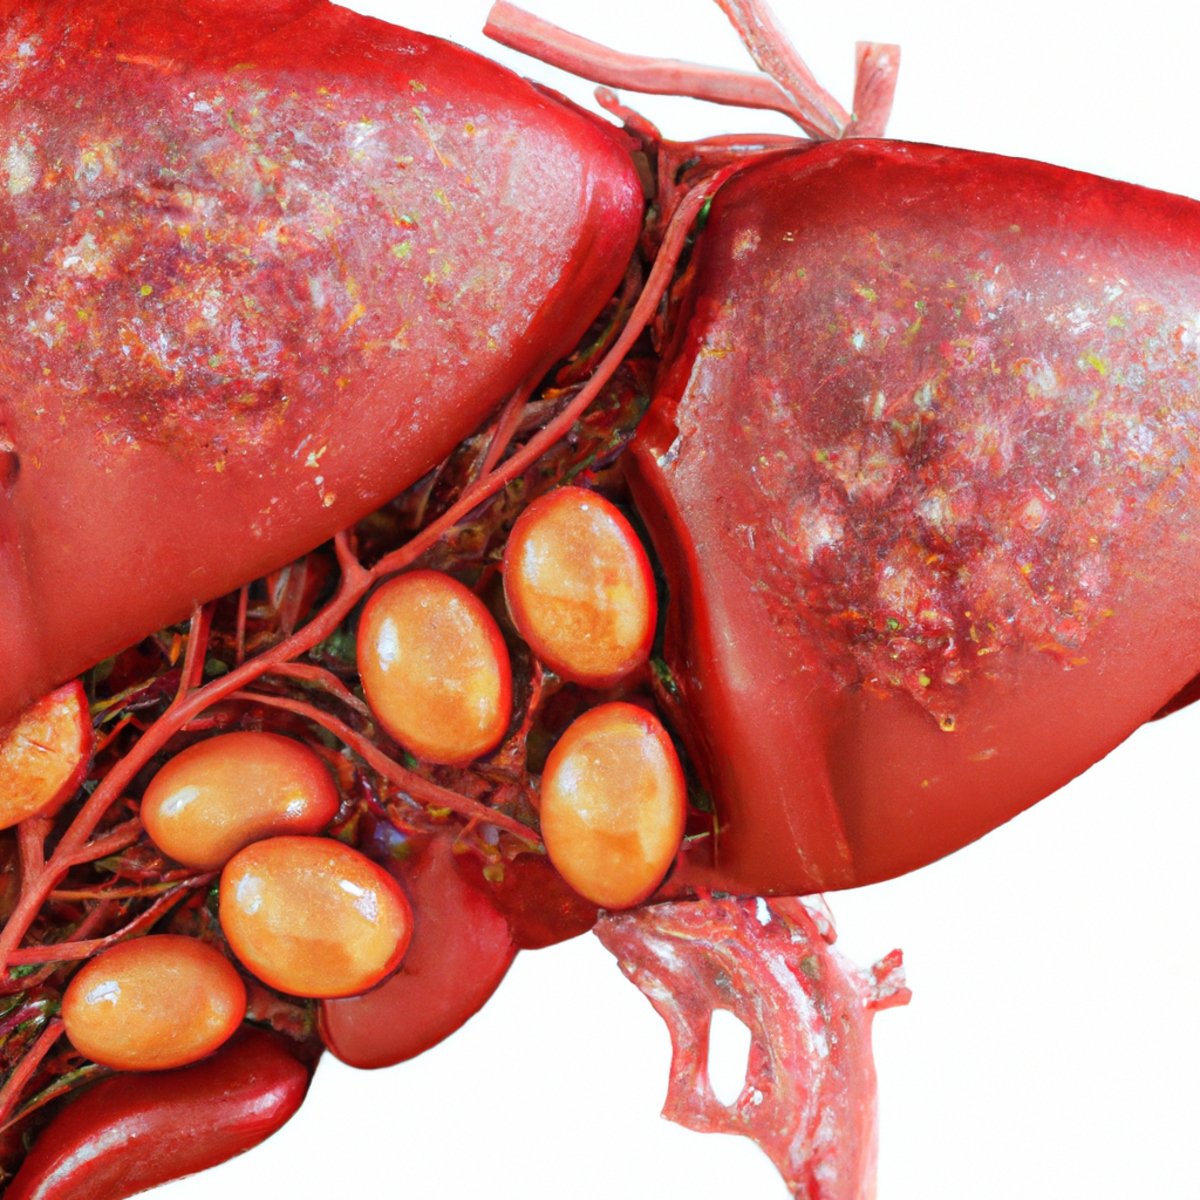 Close-up of liver organ, vibrant red color contrasts with pale background, symbolizing excessive iron absorption in hemochromatosis.